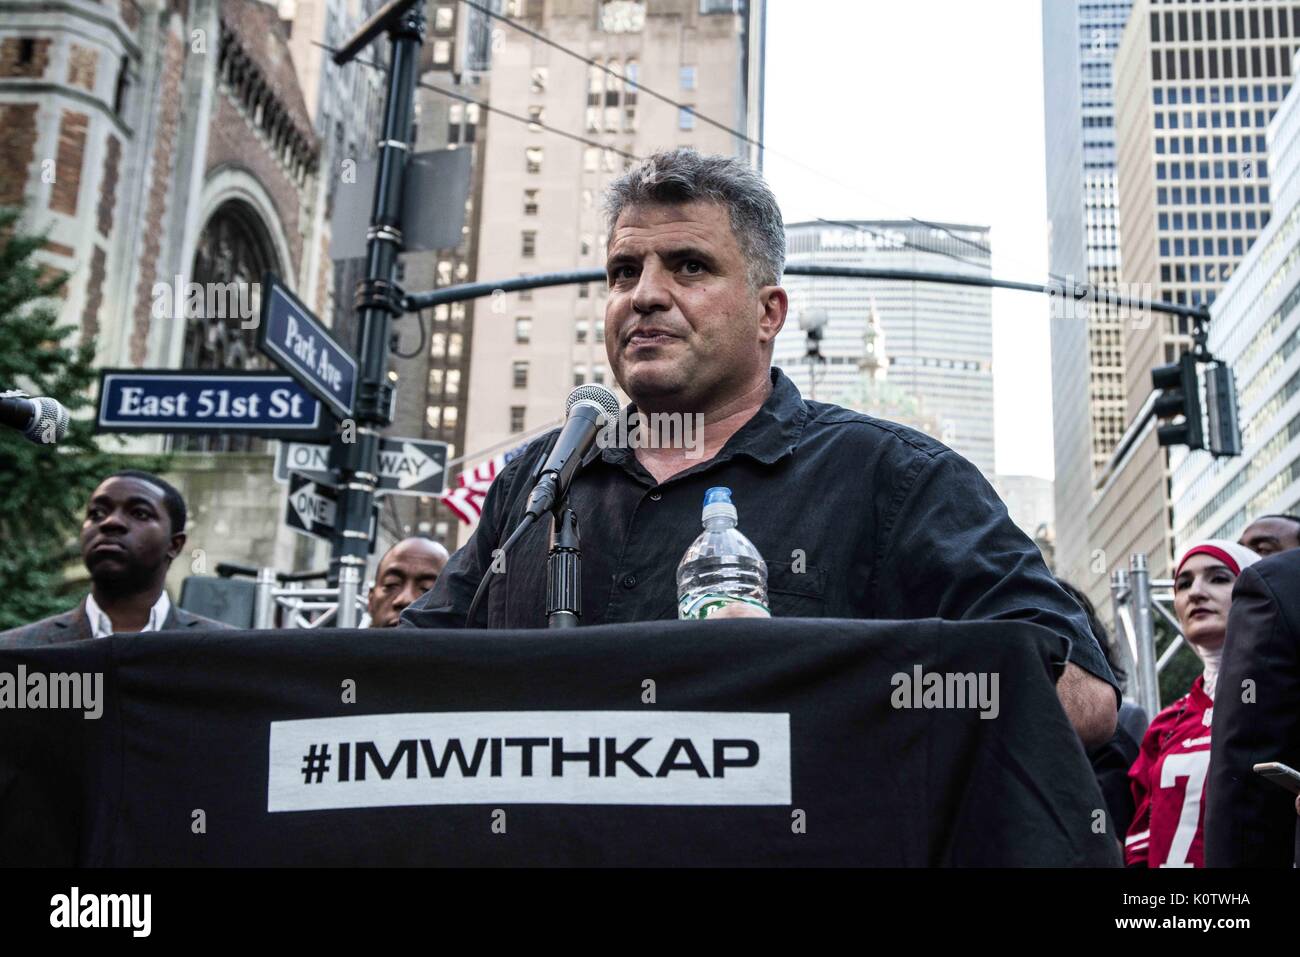 New York City, New York, USA. 23rd Aug, 2017. Dave Zaran of The Nation. New Yorkers rallied behind now-unsigned NFL player Colin Kaepernick who has remained seated during the singing of the US Nation. al Anthem since 2016. Kaepernick has stated ''I am not going to stand up to show pride in a flag for a country that oppresses black people and people of color.' Credit: ZUMA Press, Inc./Alamy Live News Stock Photo